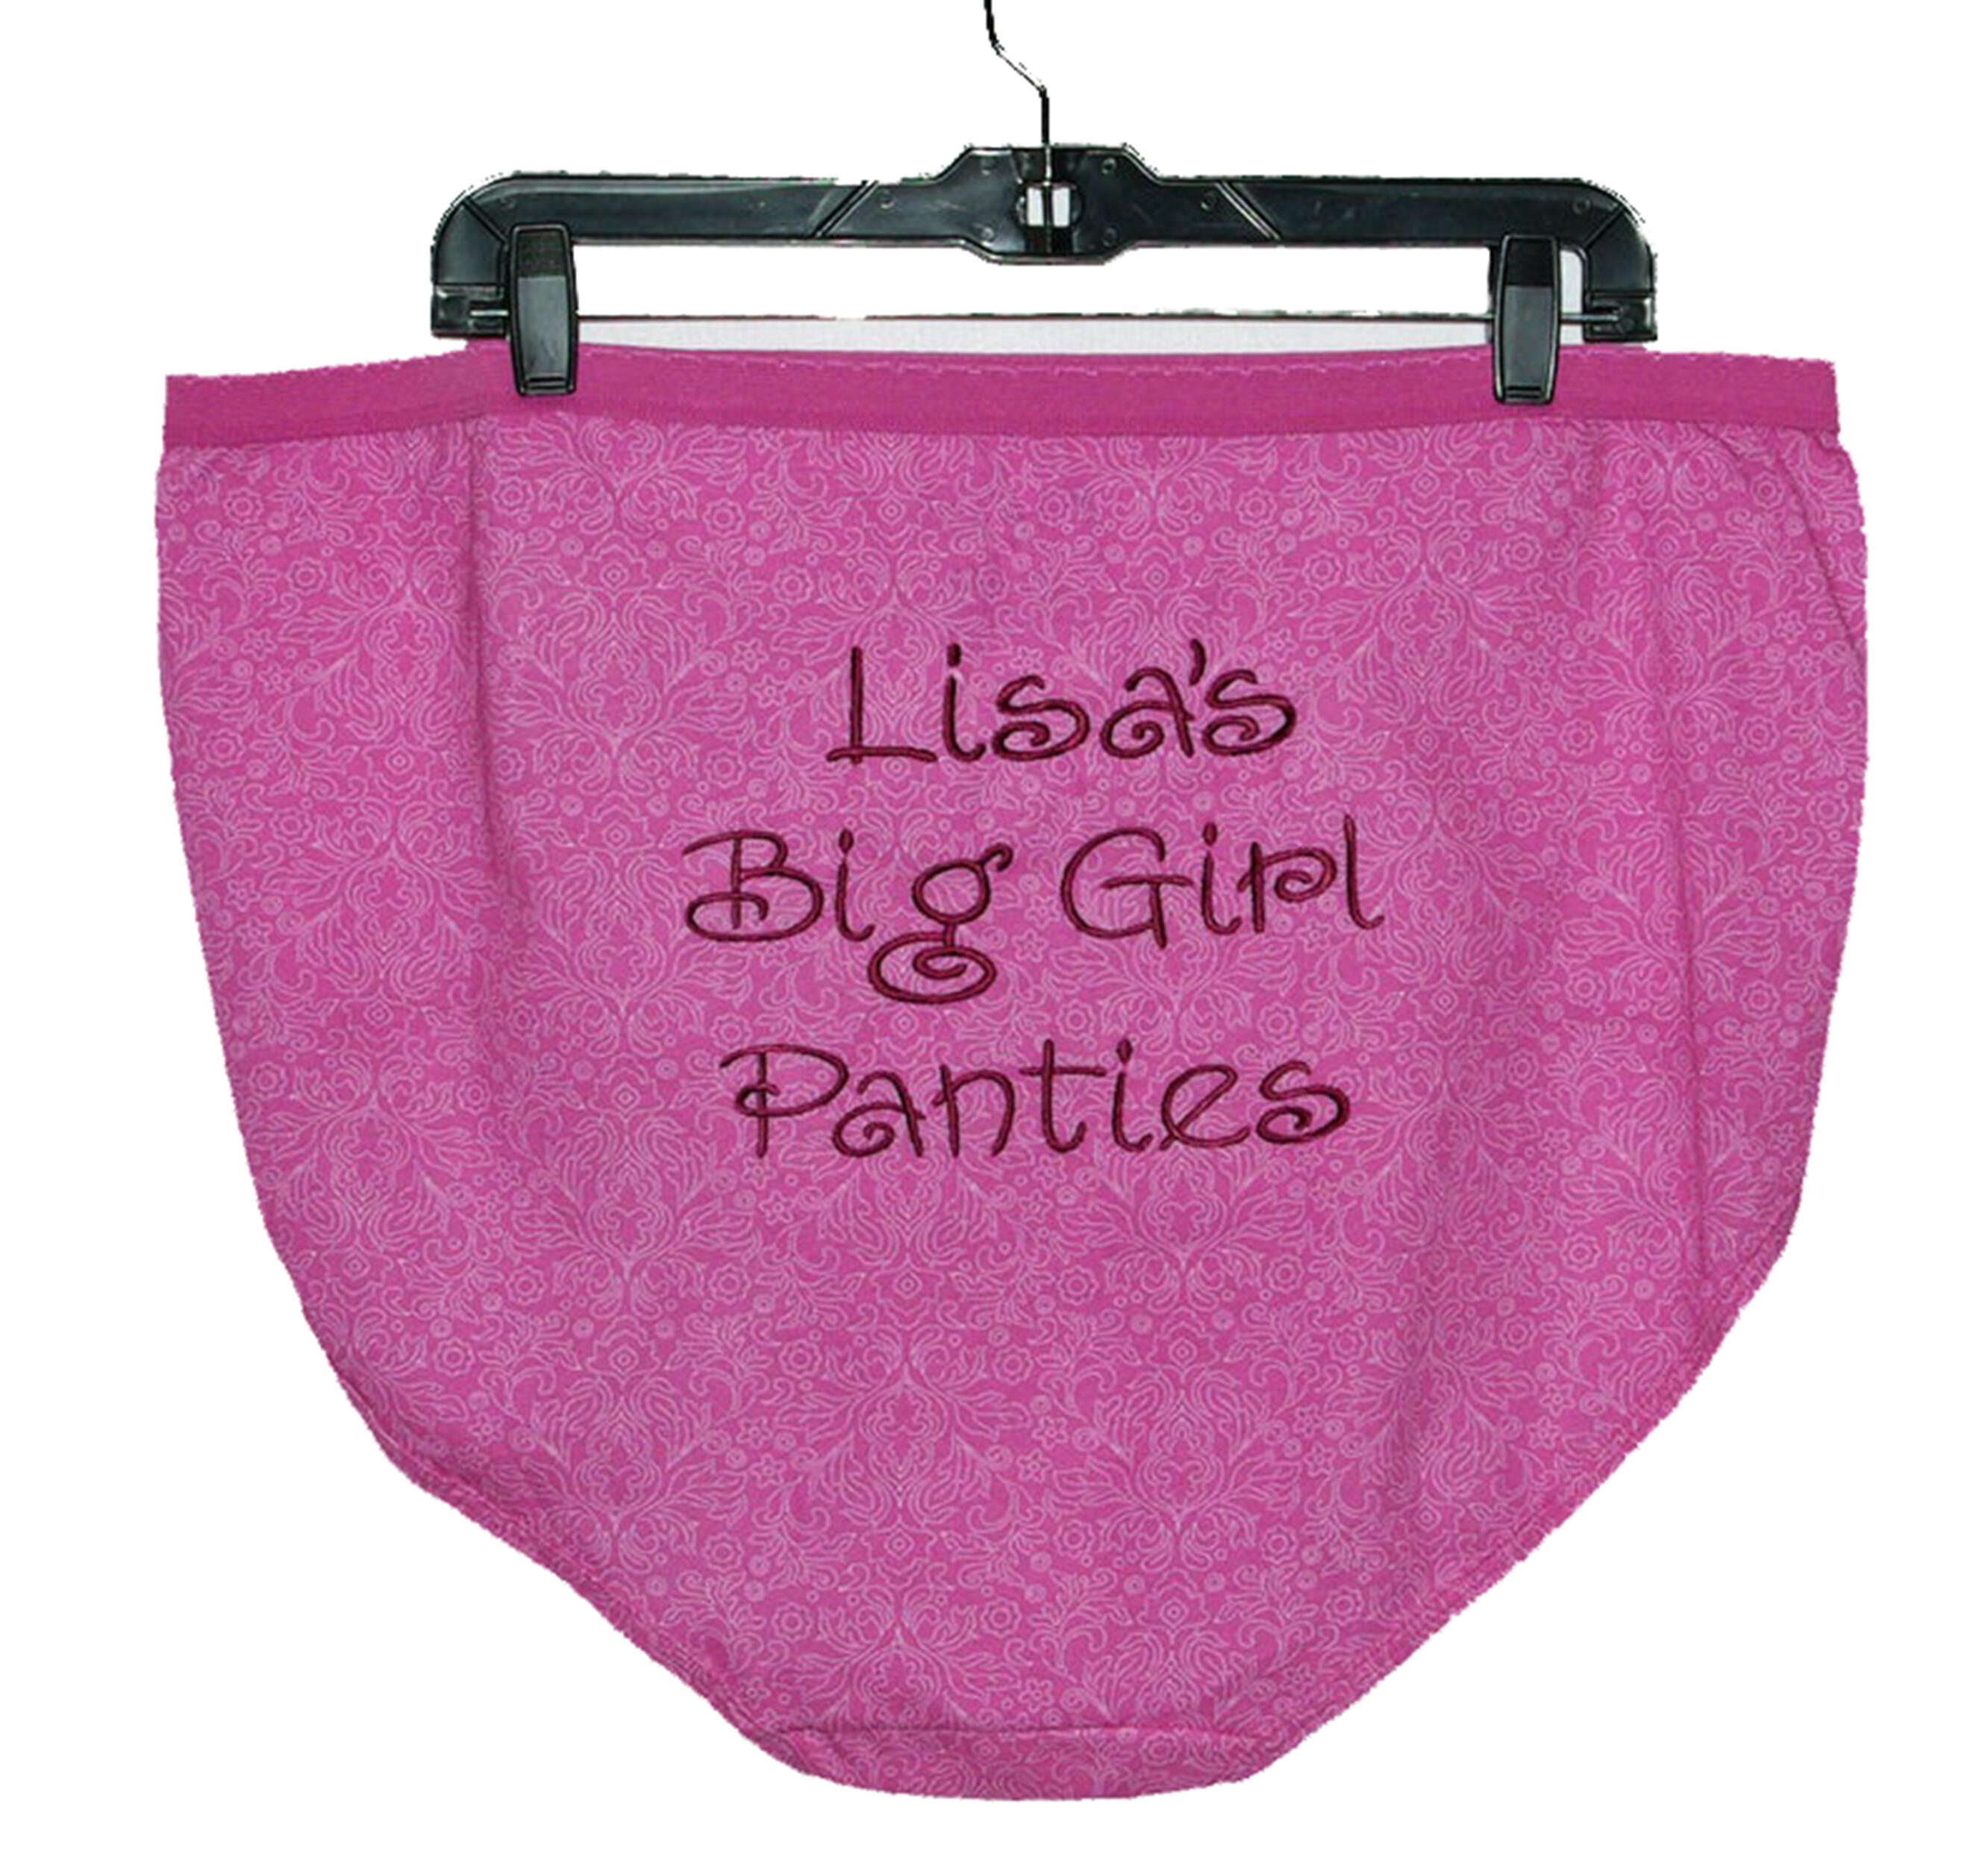 Granny Panties, Large, Gag Gift Exchange, Bridal Shower, Grandma, Mimi,  Bride, Guy, Hubby, Wife, Grammy, Personalized, Ships Today, AGFT 054